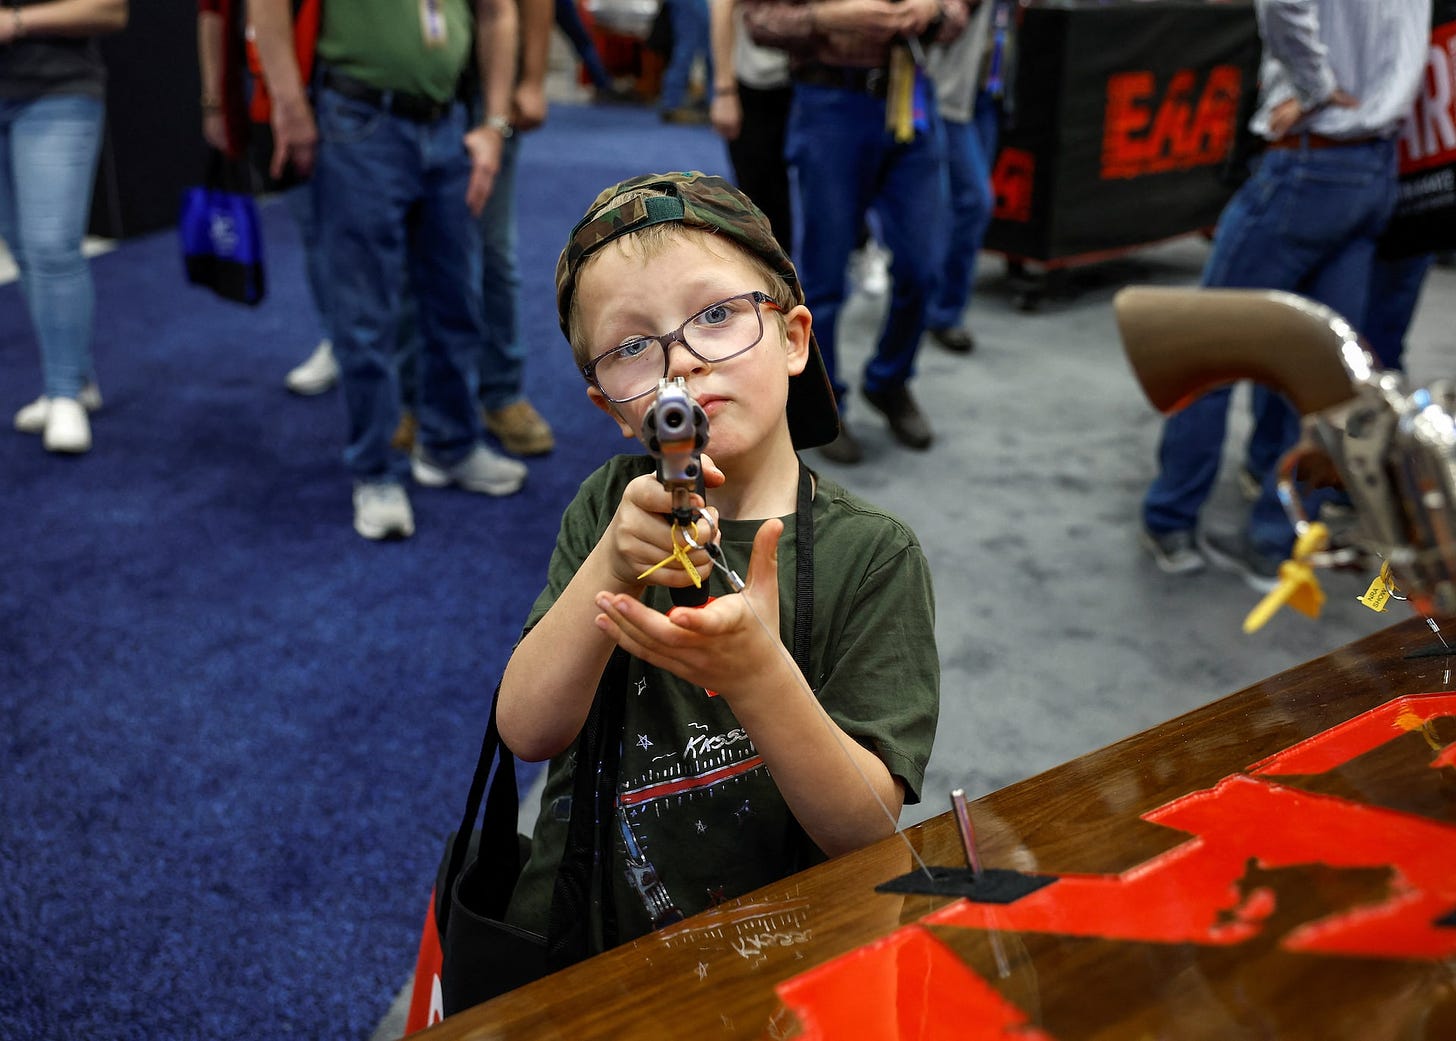 The National Rifle Association (NRA) annual meeting is held in Indianapolis